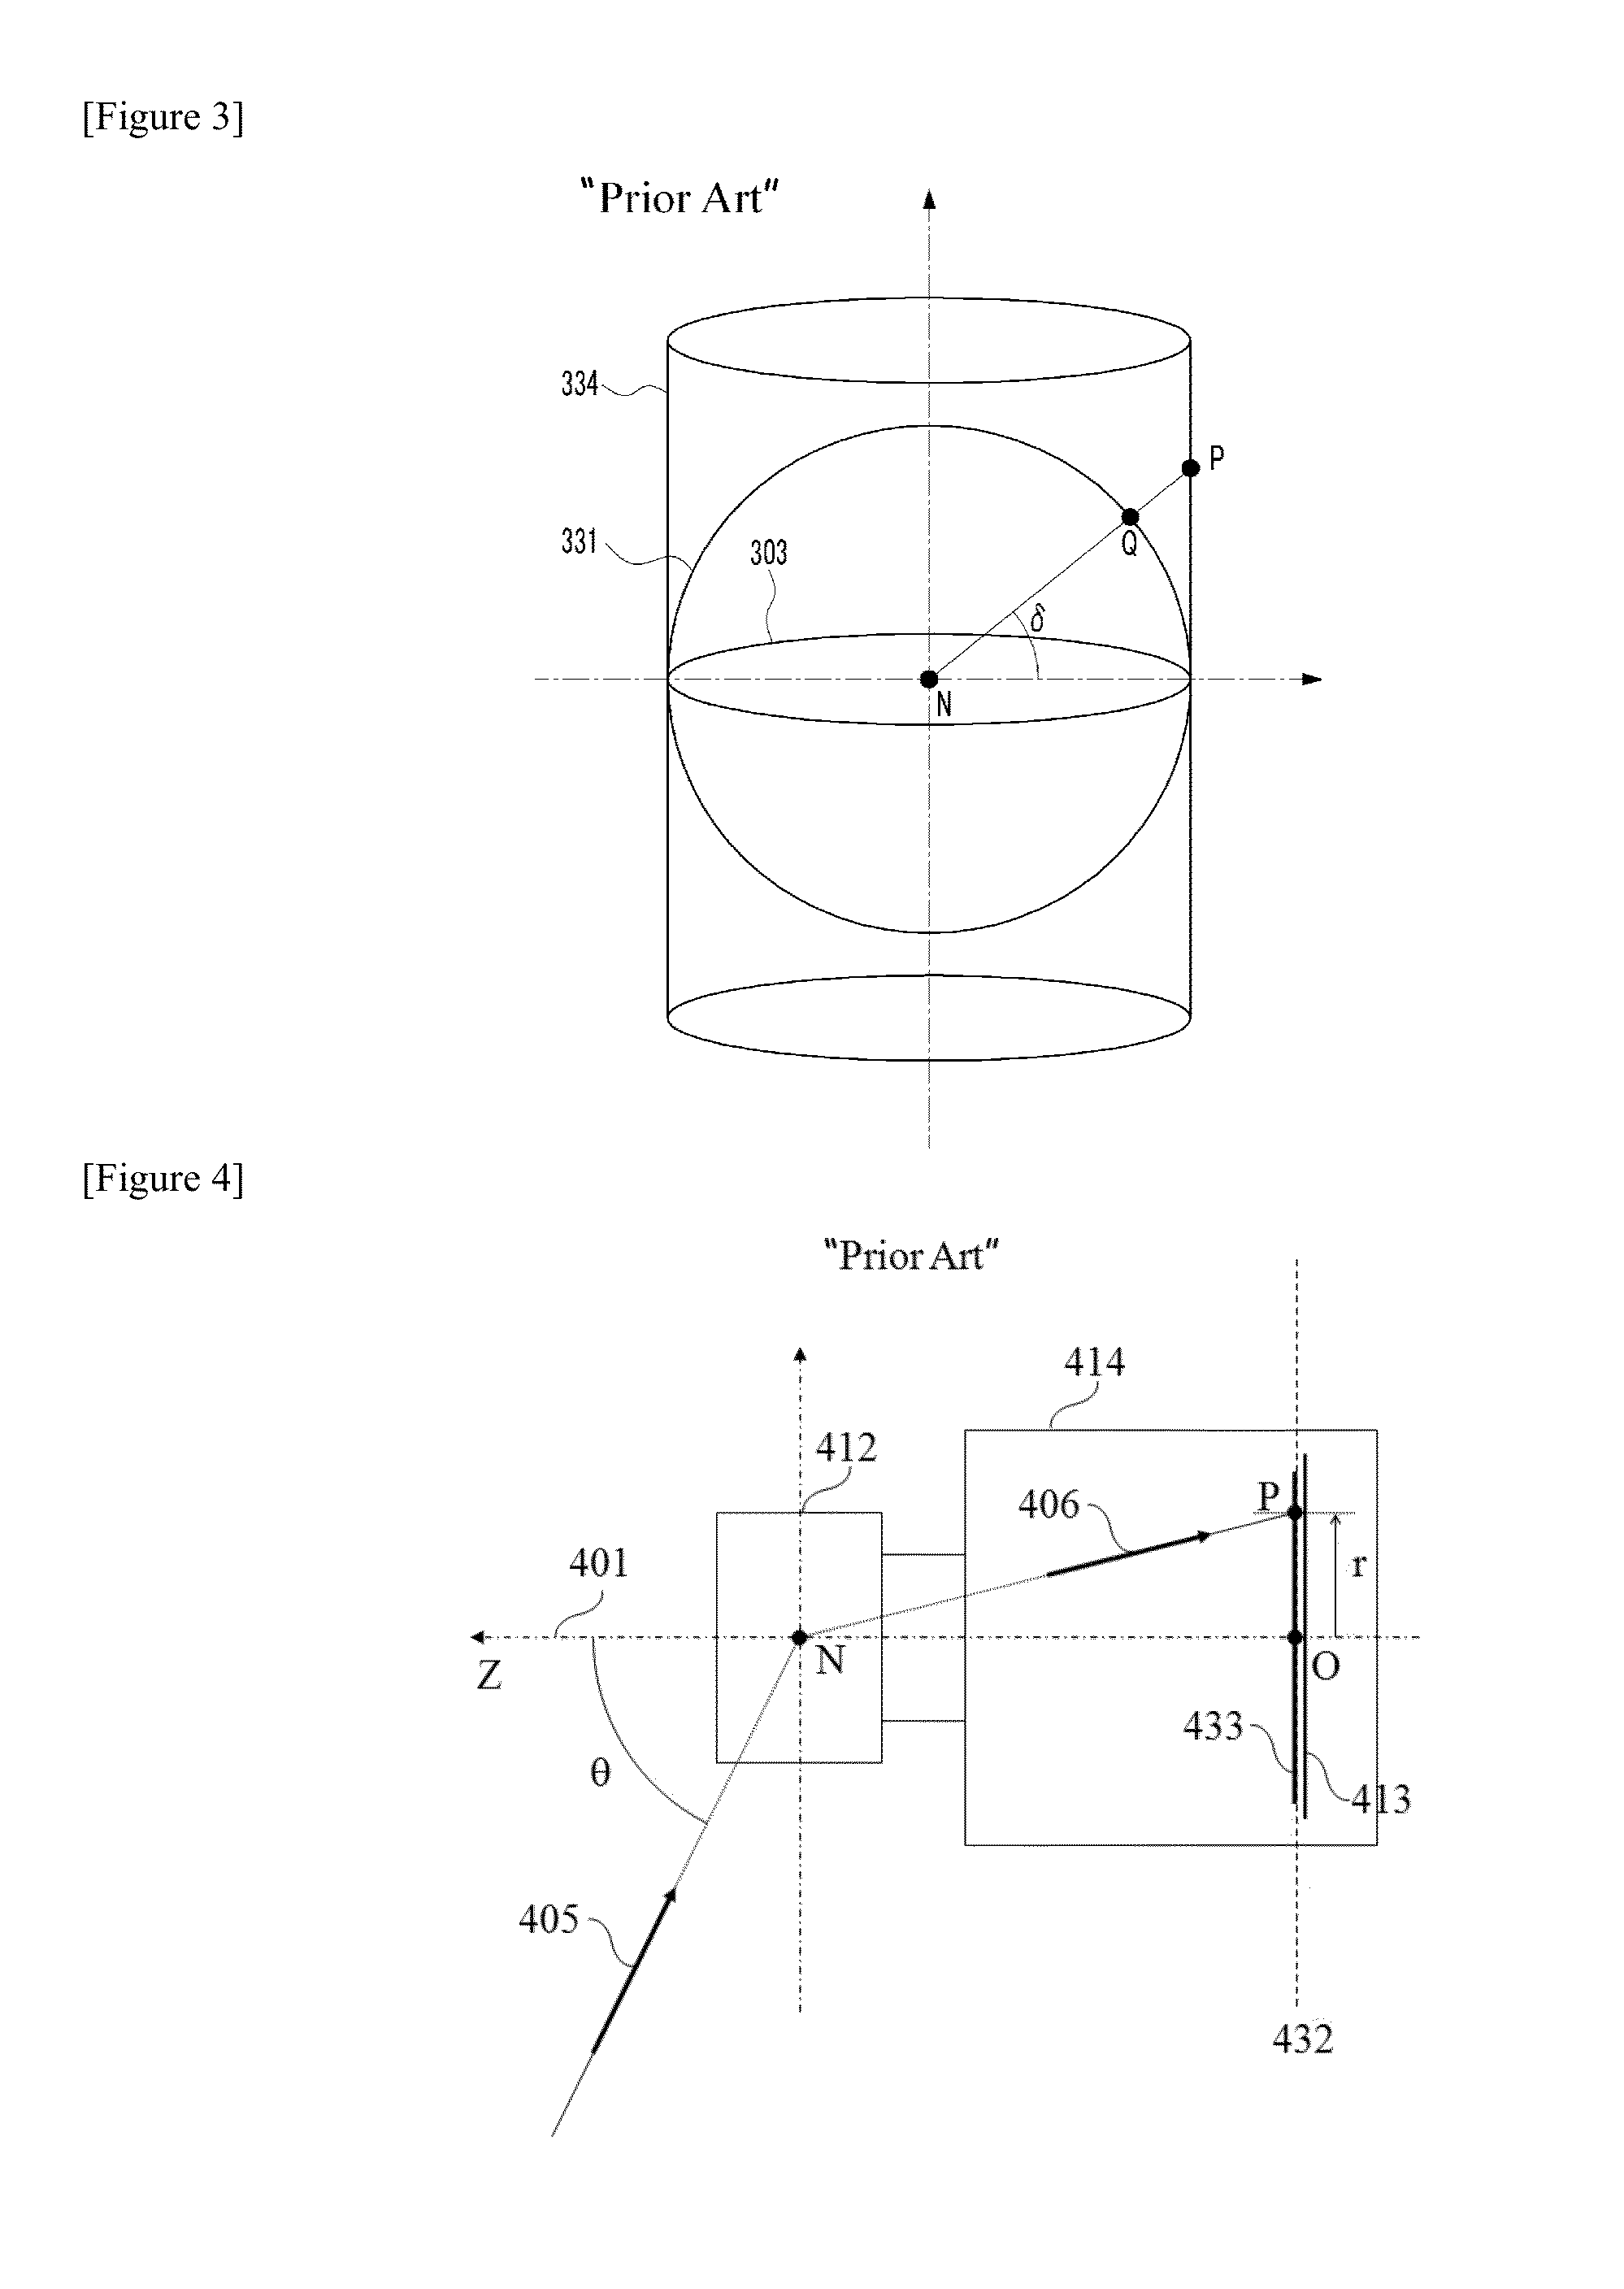 Method and apparatus for obtaining panoramic and rectilinear images using rotationally symmetric wide-angle lens